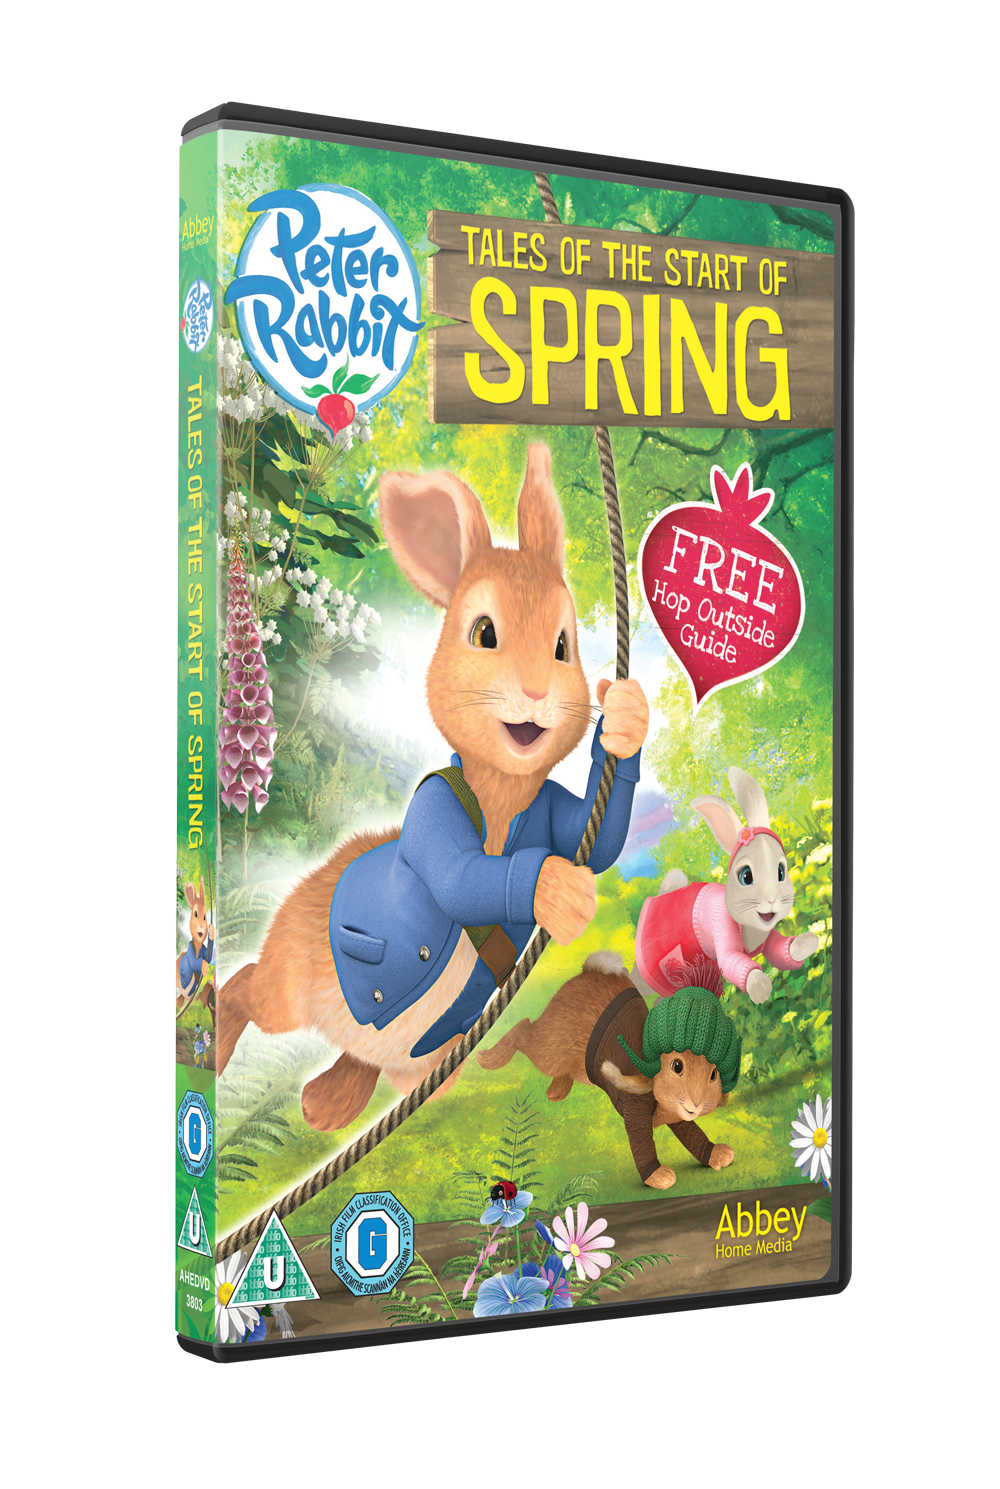 Peter Rabbit: Tales of the Start of Spring DVD